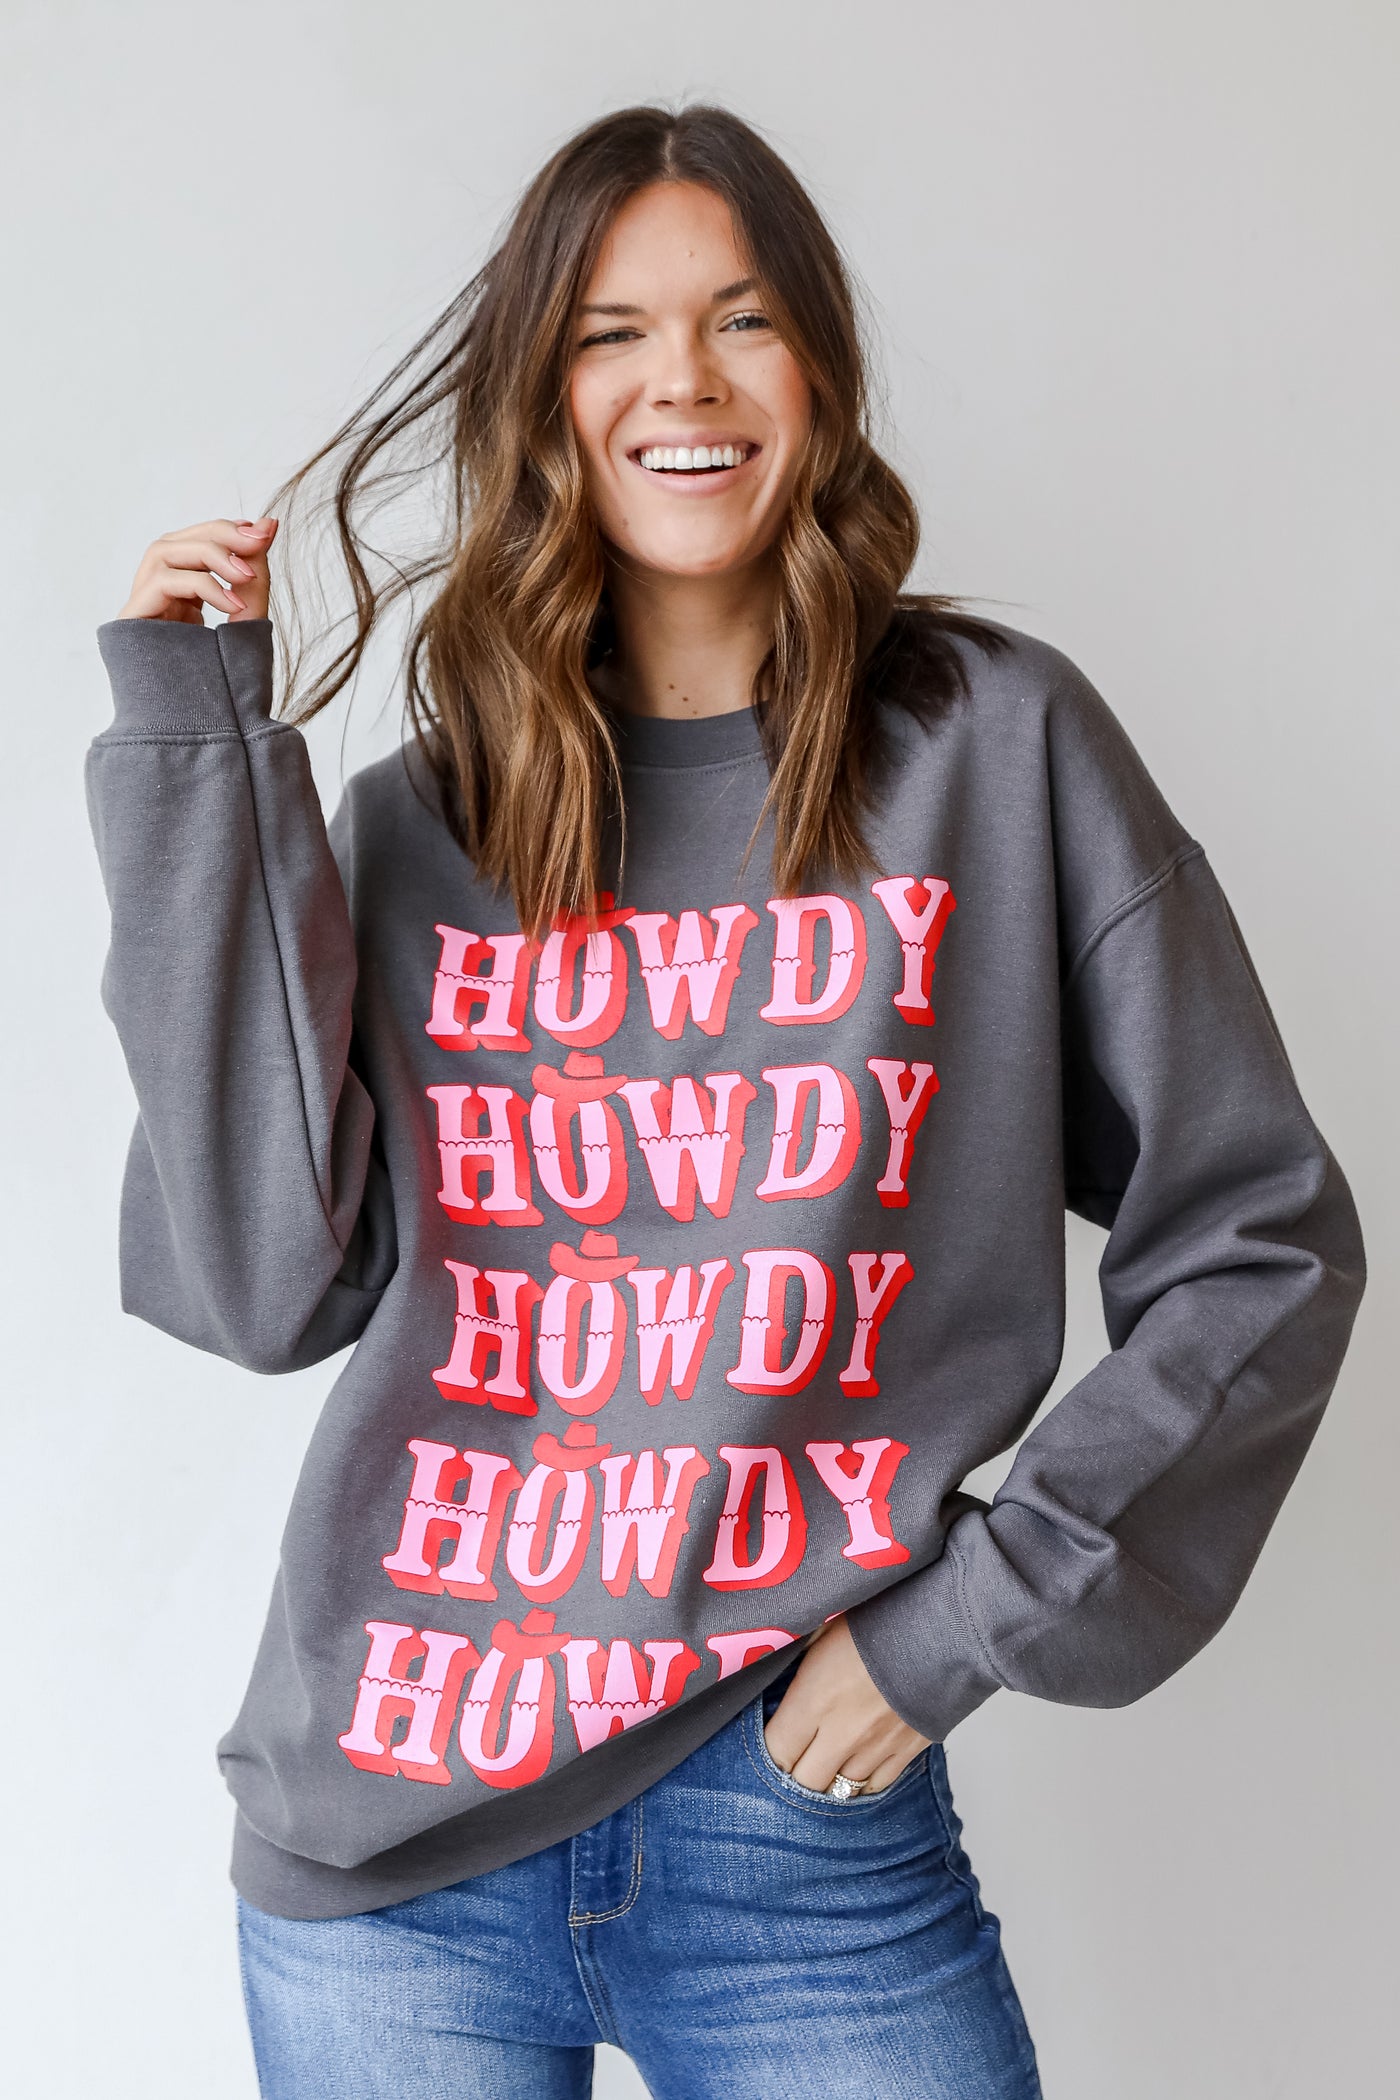 Howdy Oversized Pullover from dress up